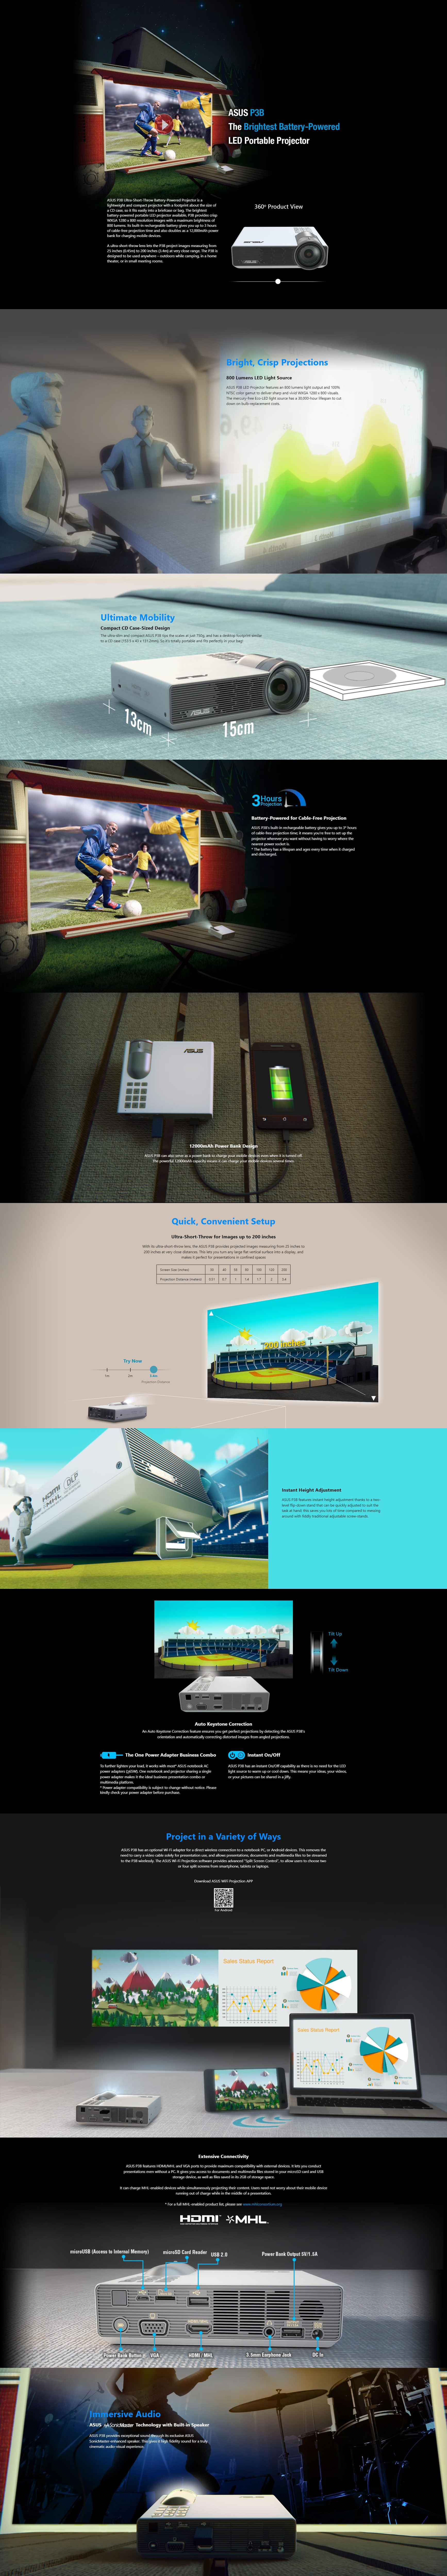 A large marketing image providing additional information about the product ASUS P3B Portable LED Projector - Additional alt info not provided